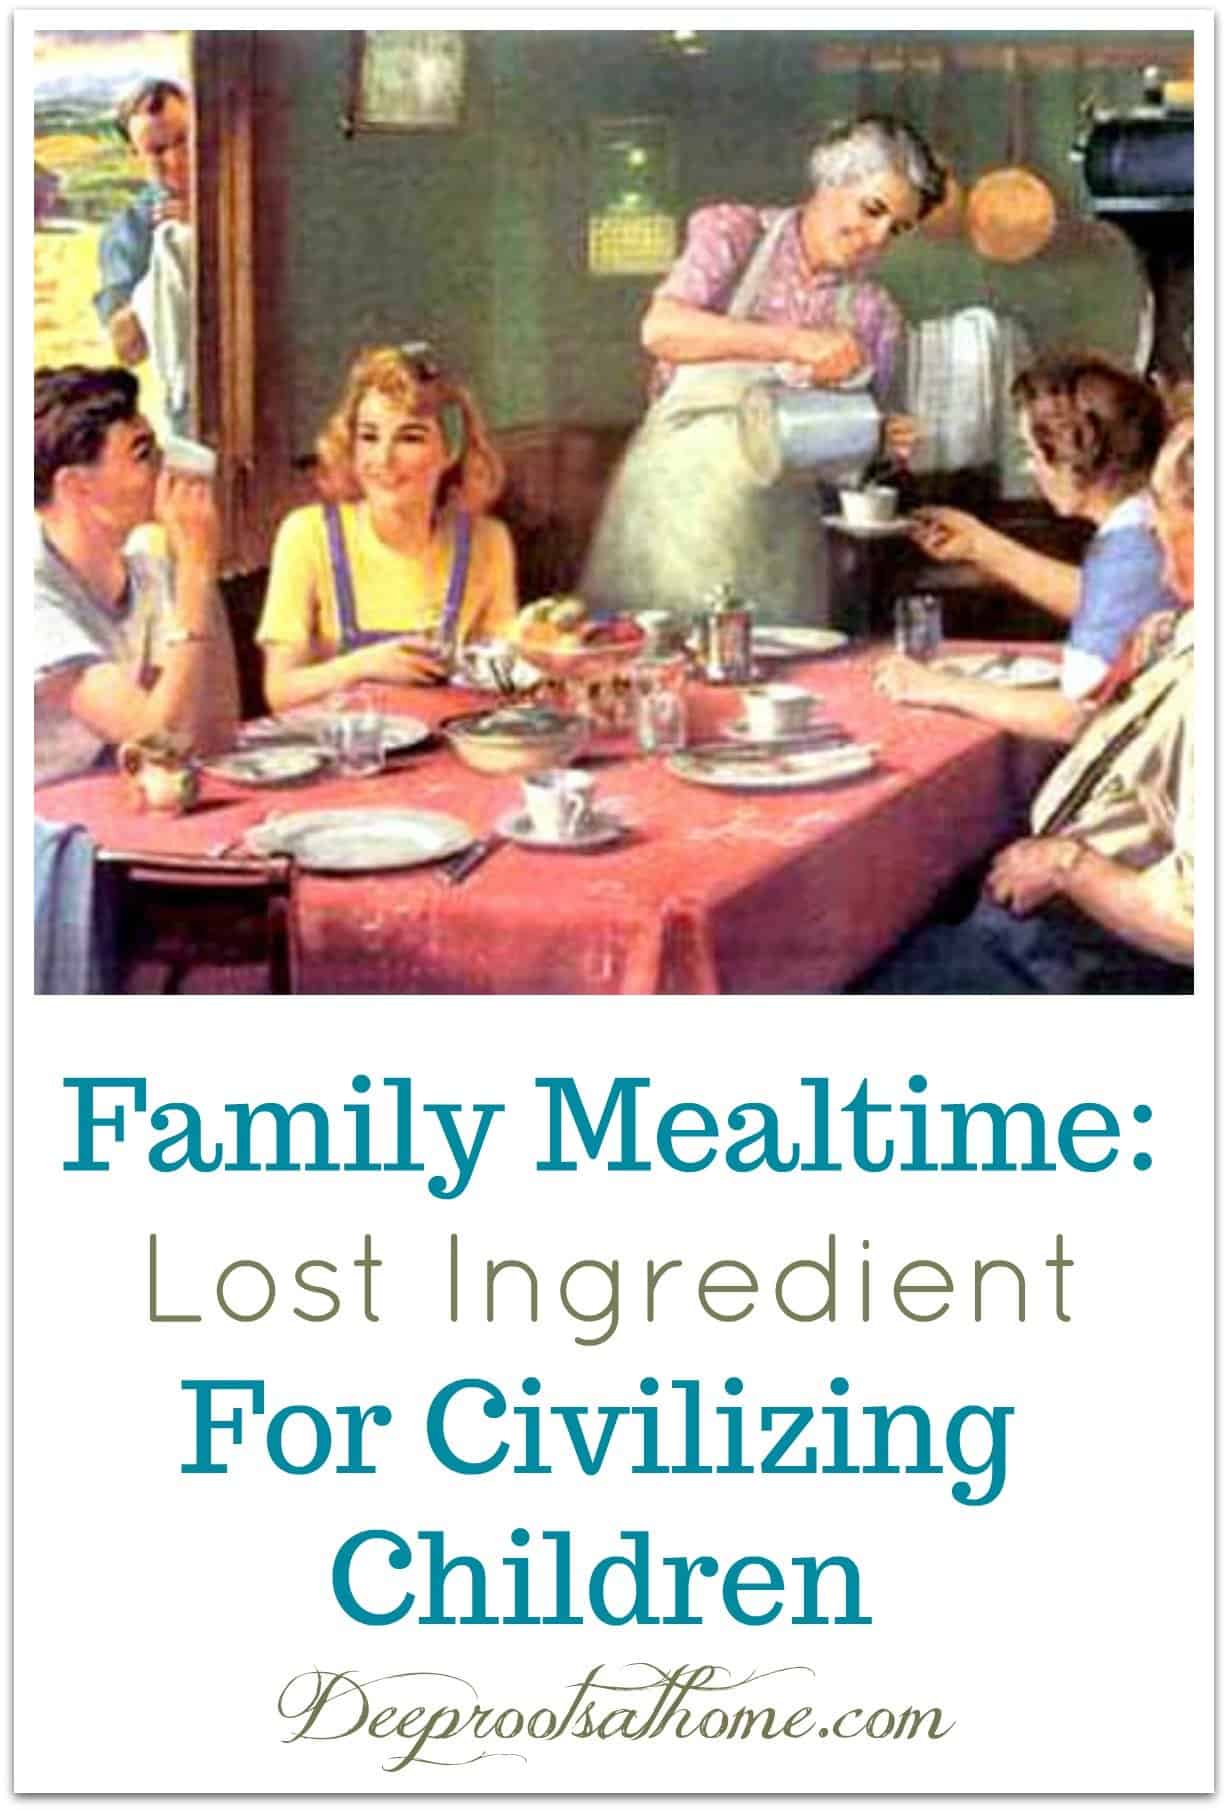 Family Mealtime: Lost Ingredient For Civilizing Children. A family, laughing together, sharing a meal. 